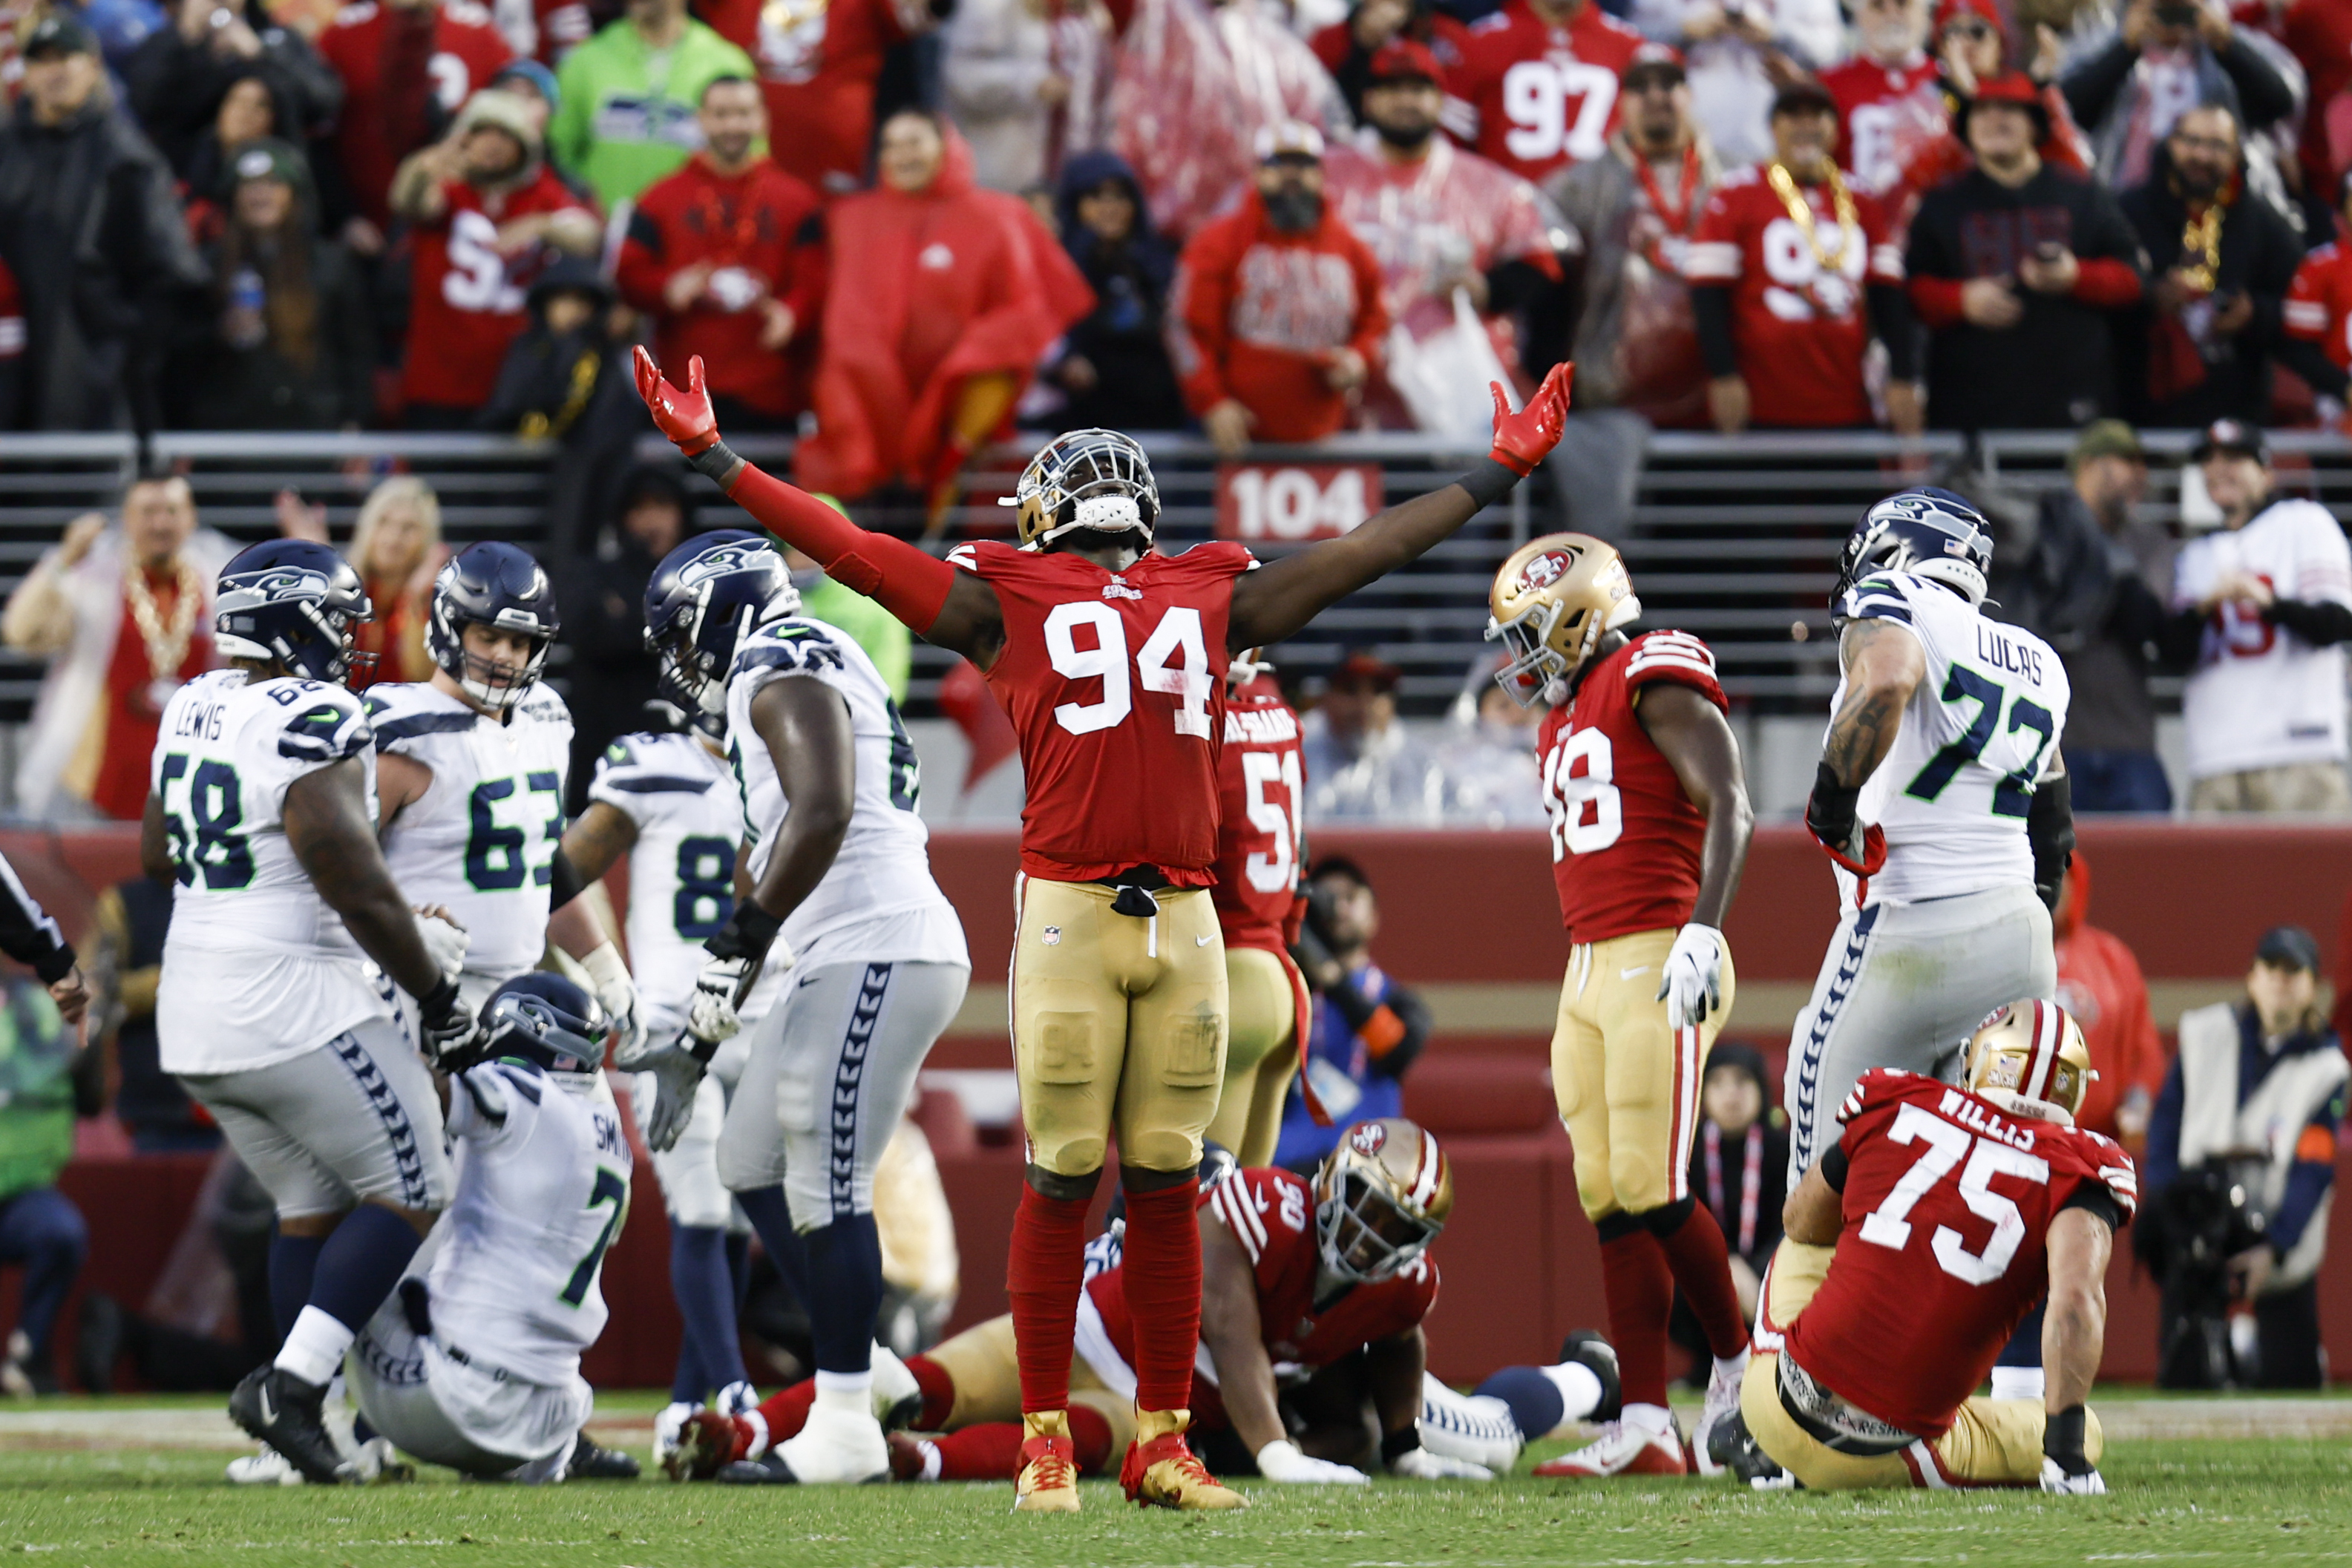 49ers-Eagles NFC championship matchup has old-school feel - The